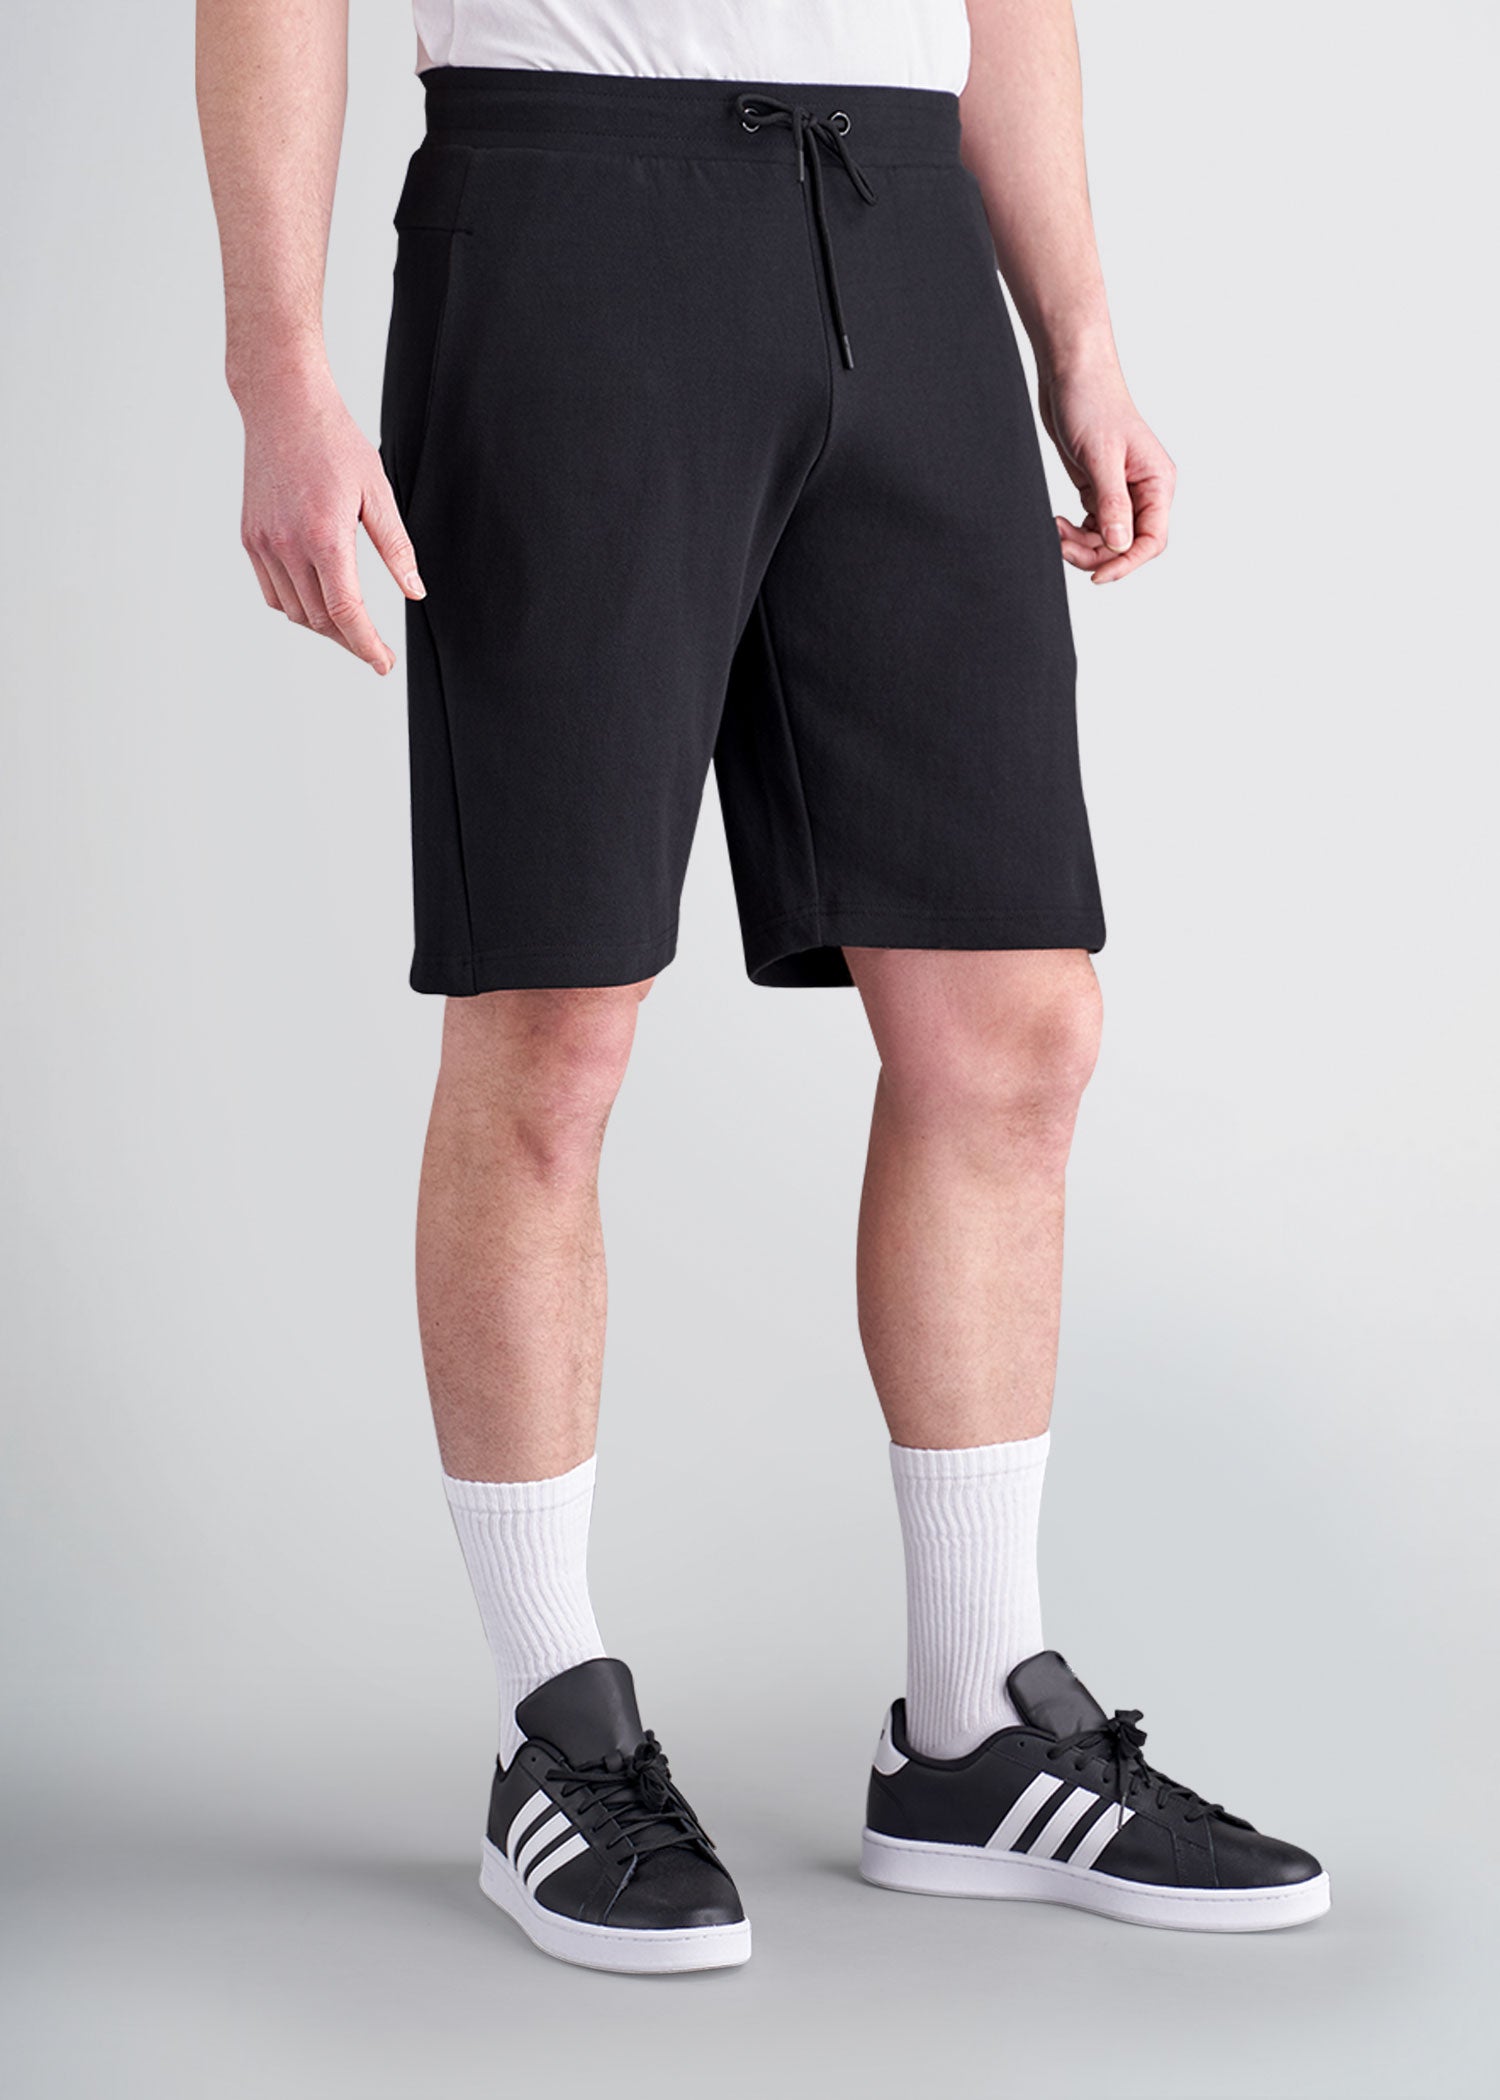 Knit Athletic Gym Shorts For Tall Men